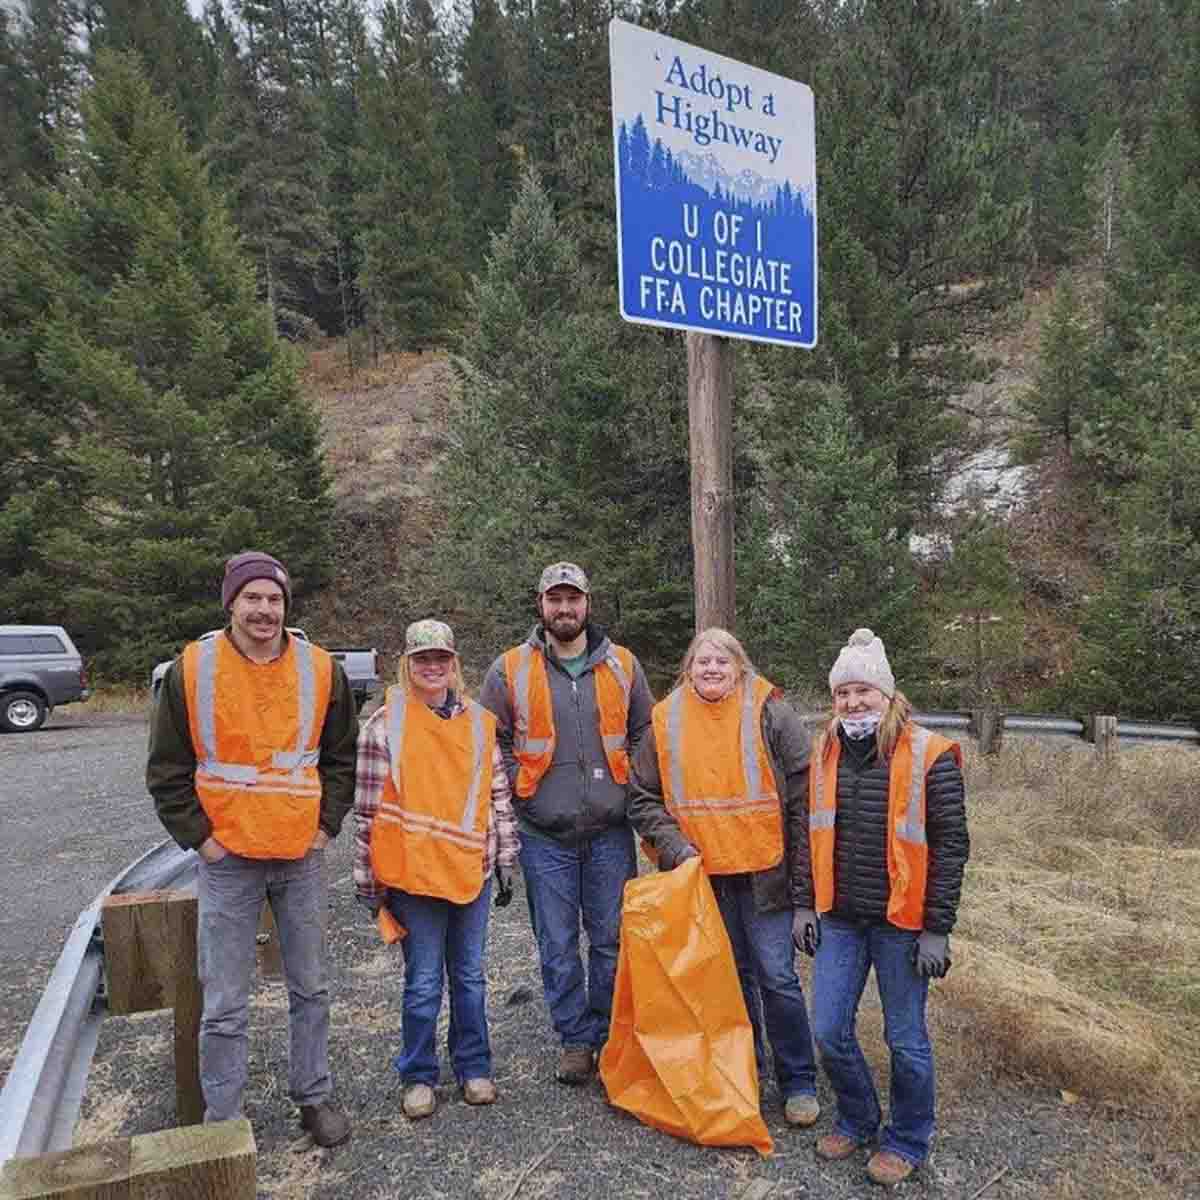 A group with orange vests.